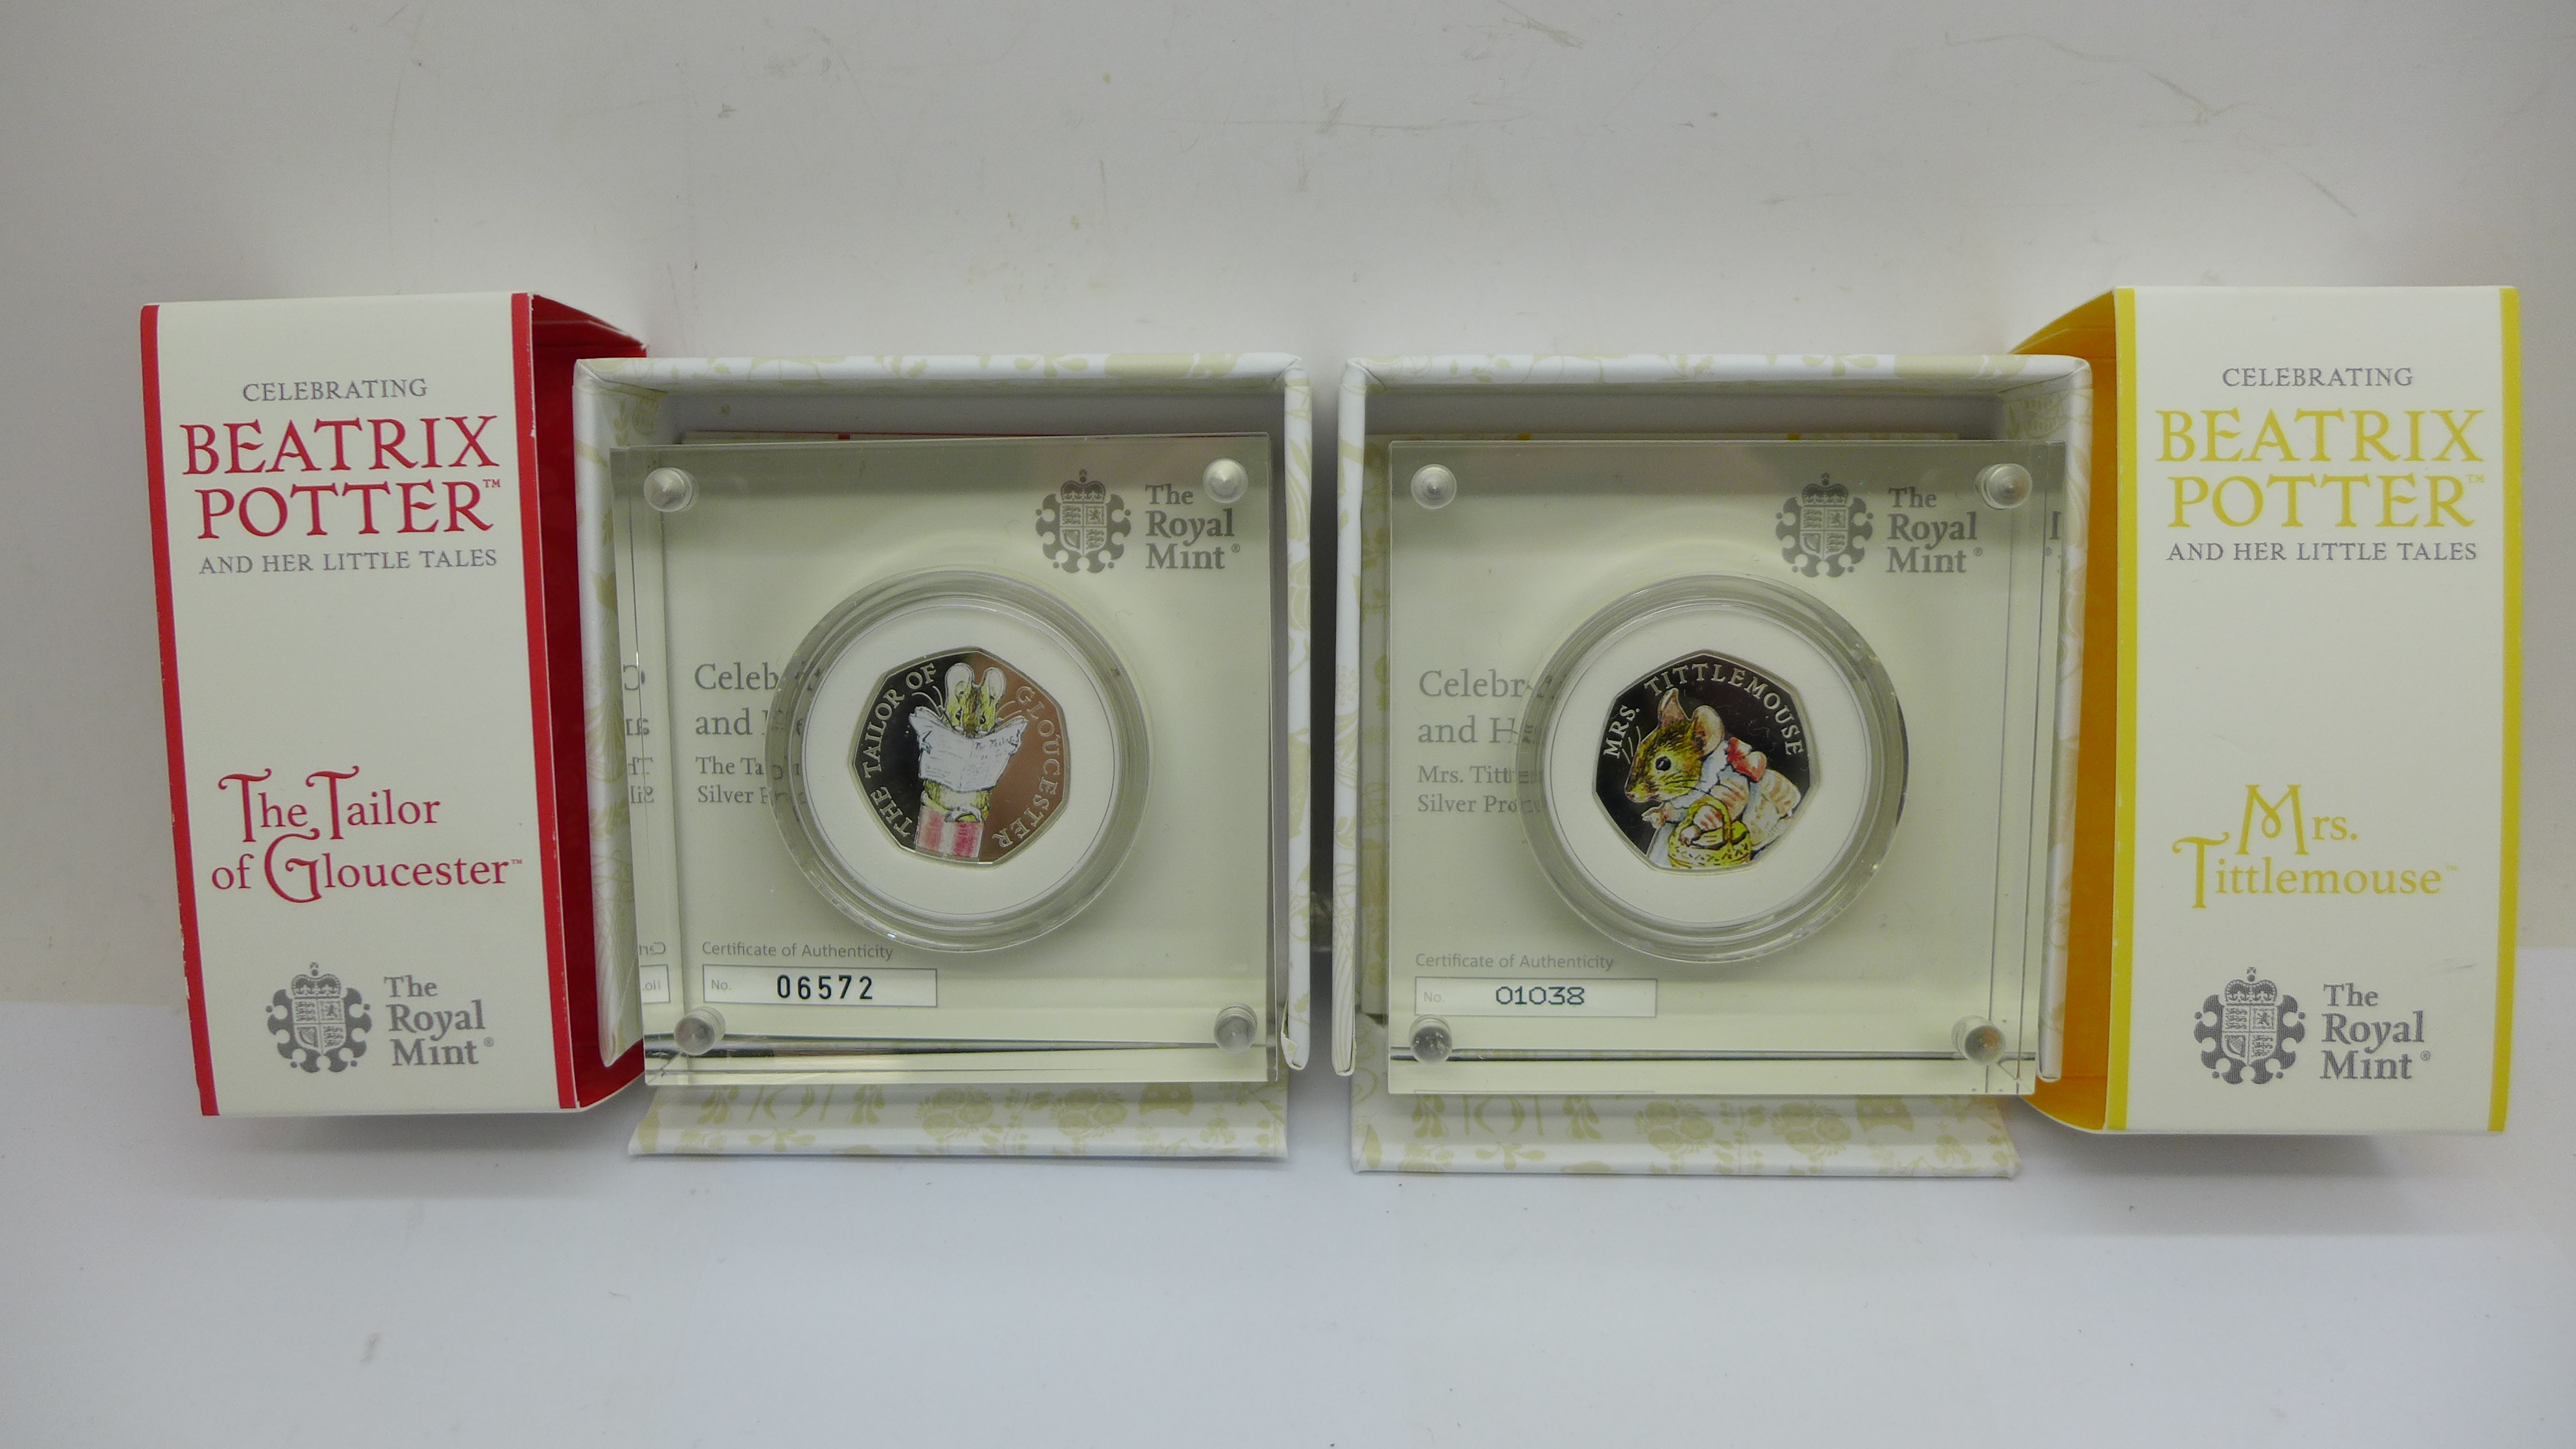 Two Beatrix Potter 50p silver coins, Mrs Tittlemouse and The Tailor of Gloucester, boxed